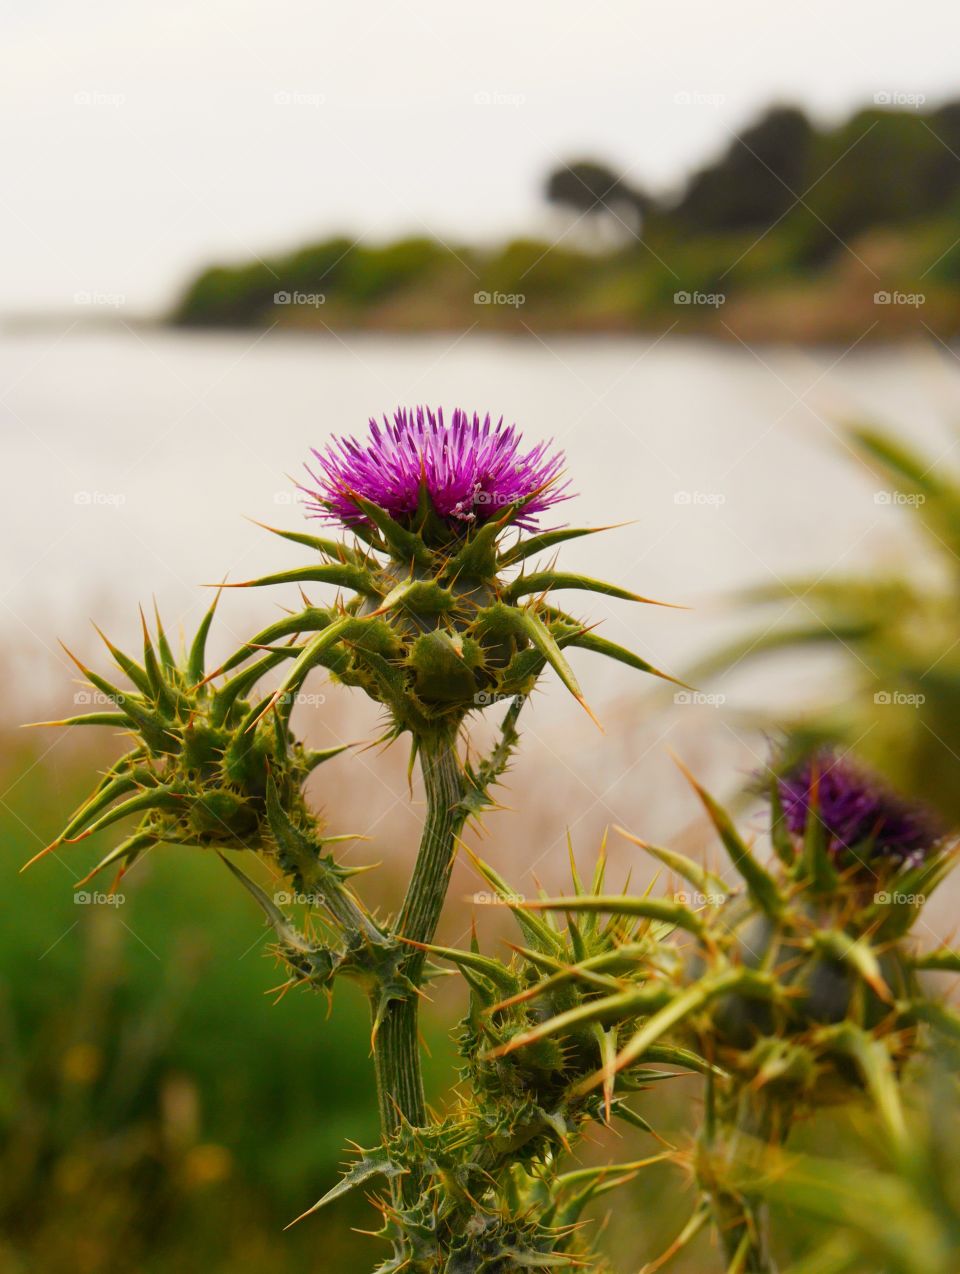 Thistle flower blooming outdoors